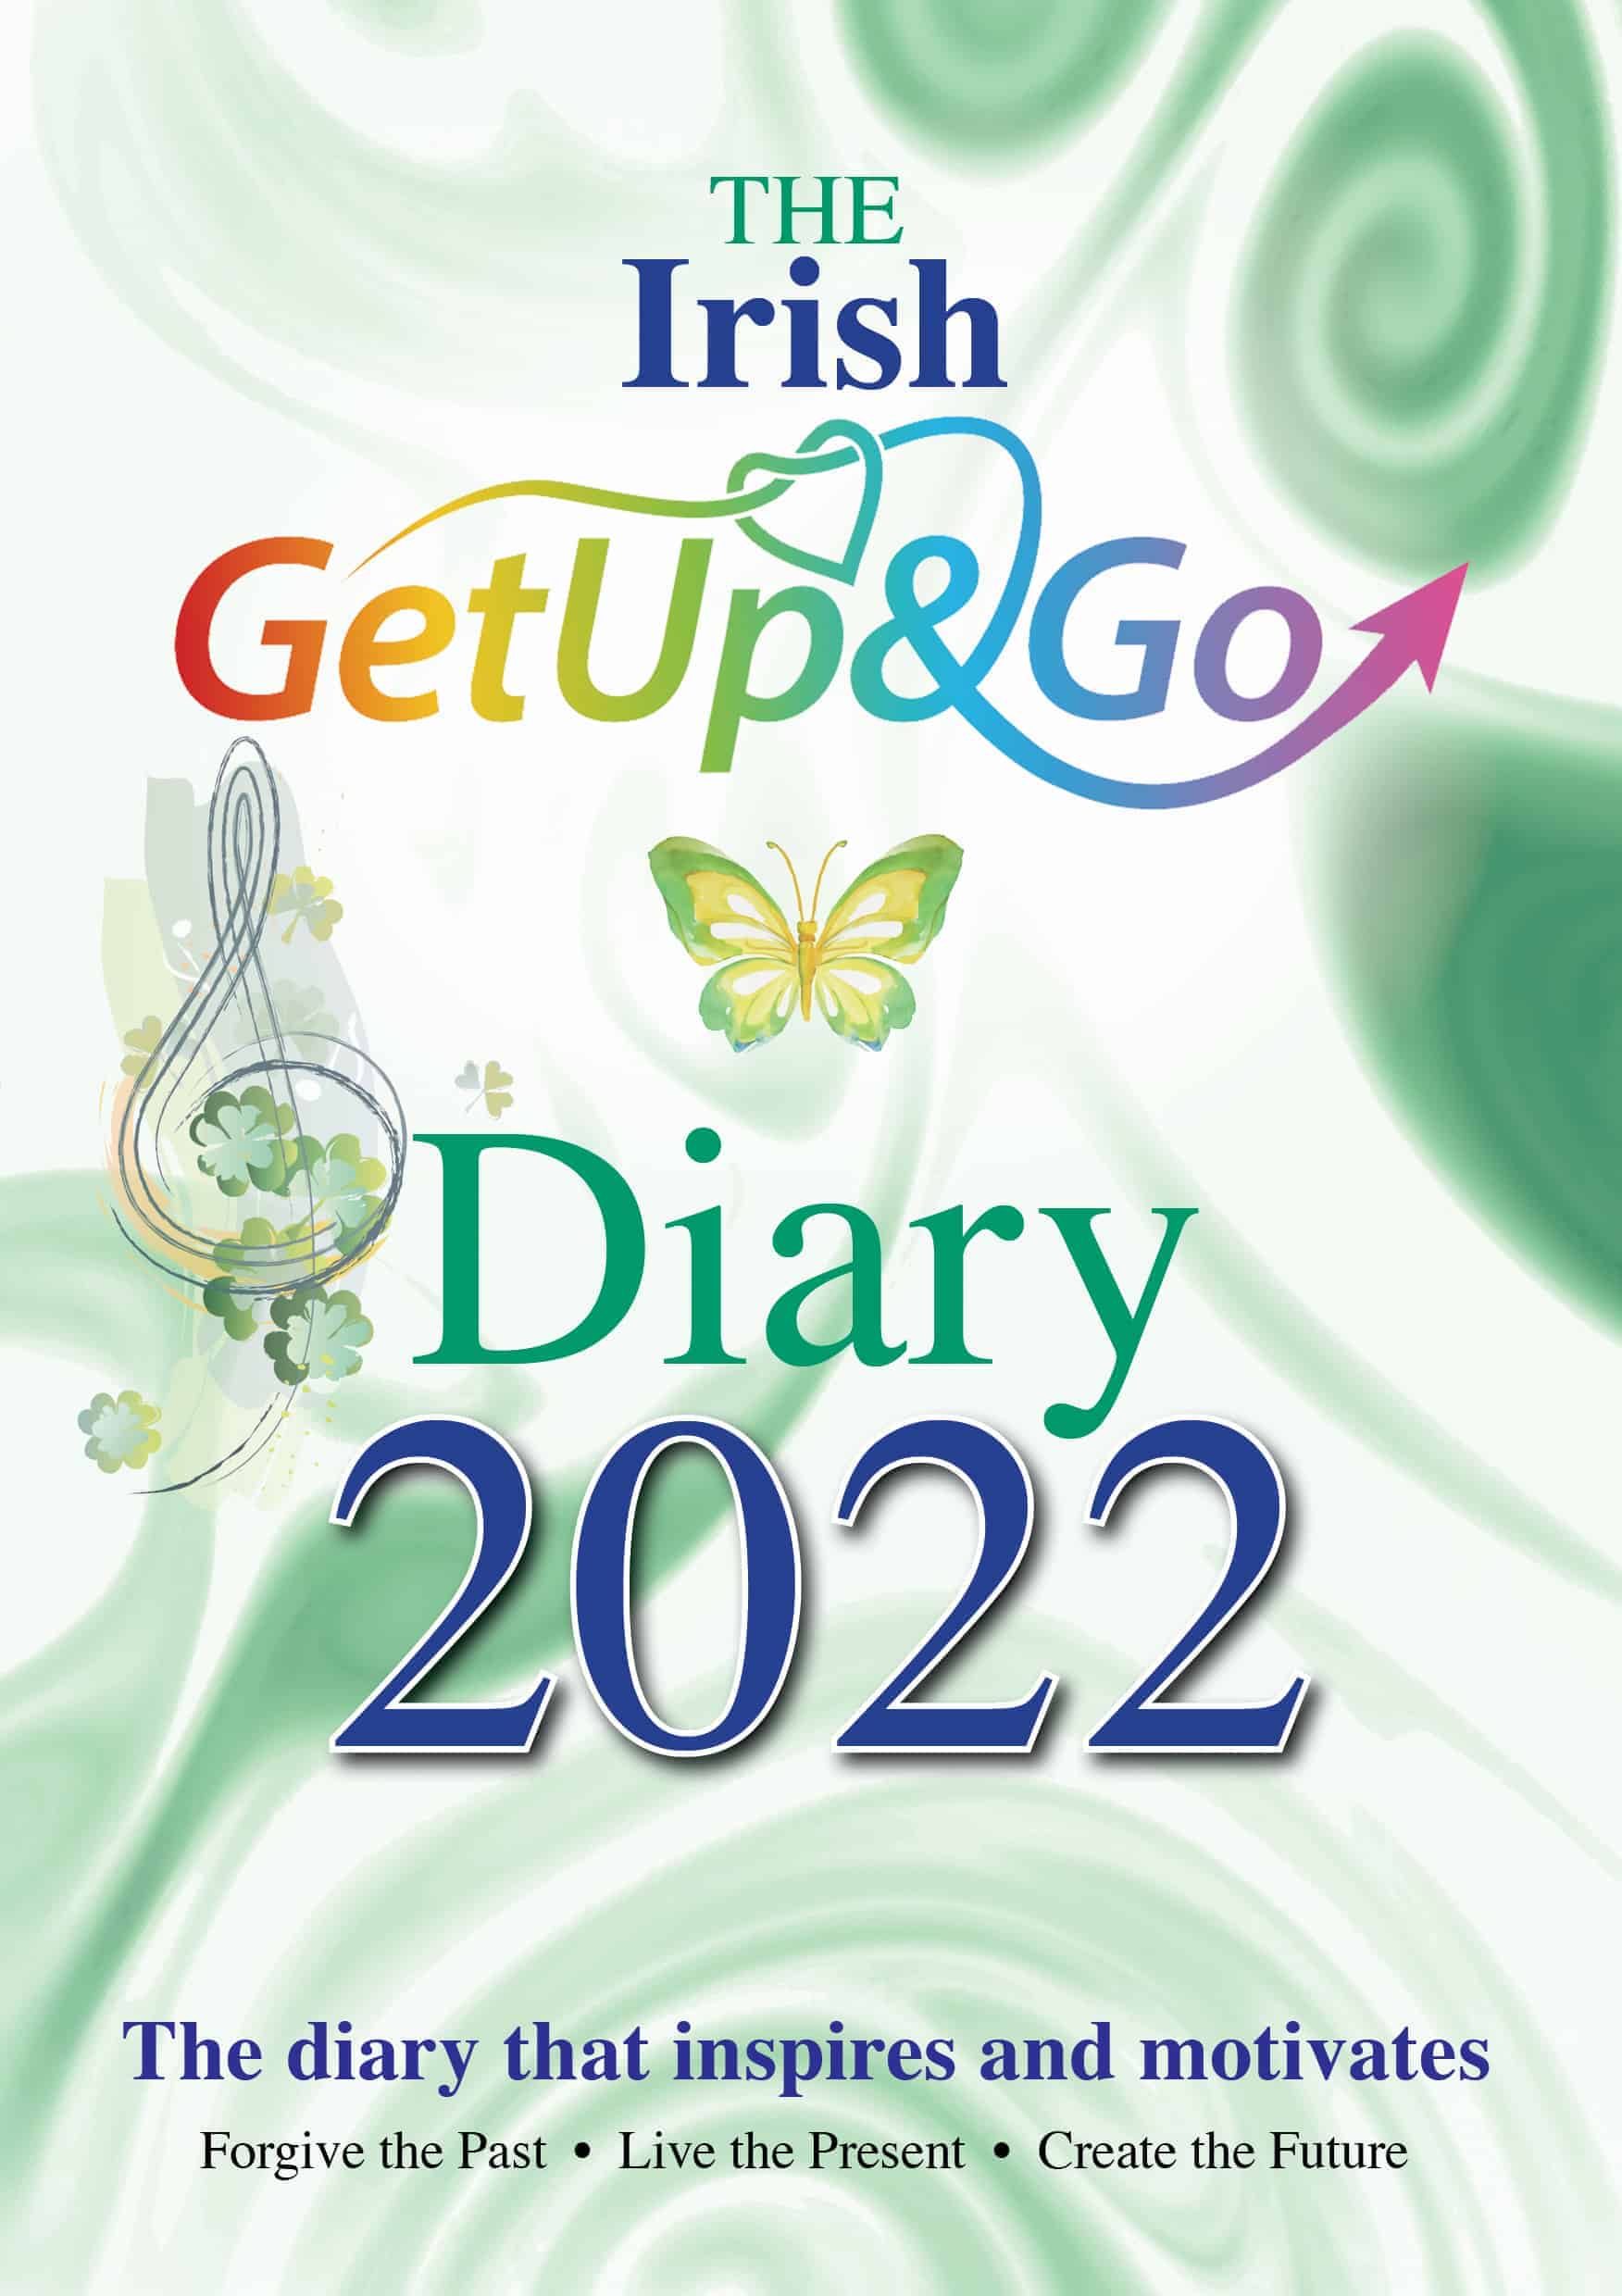 The IRISH "Get Up and Go" Diary for 2022